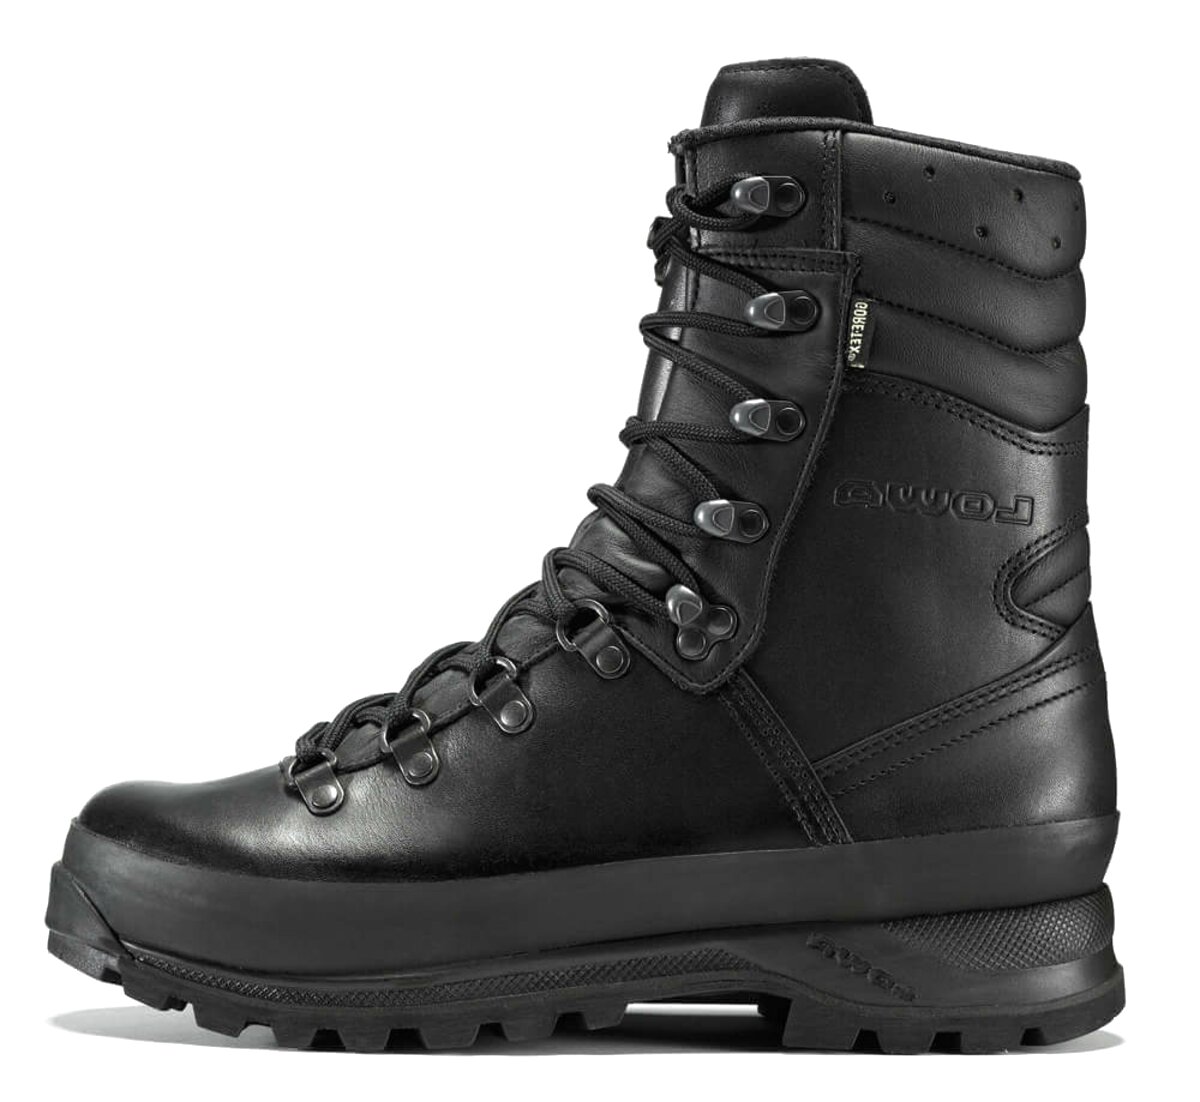 Lowa Combat Boots for sale in UK | 61 used Lowa Combat Boots